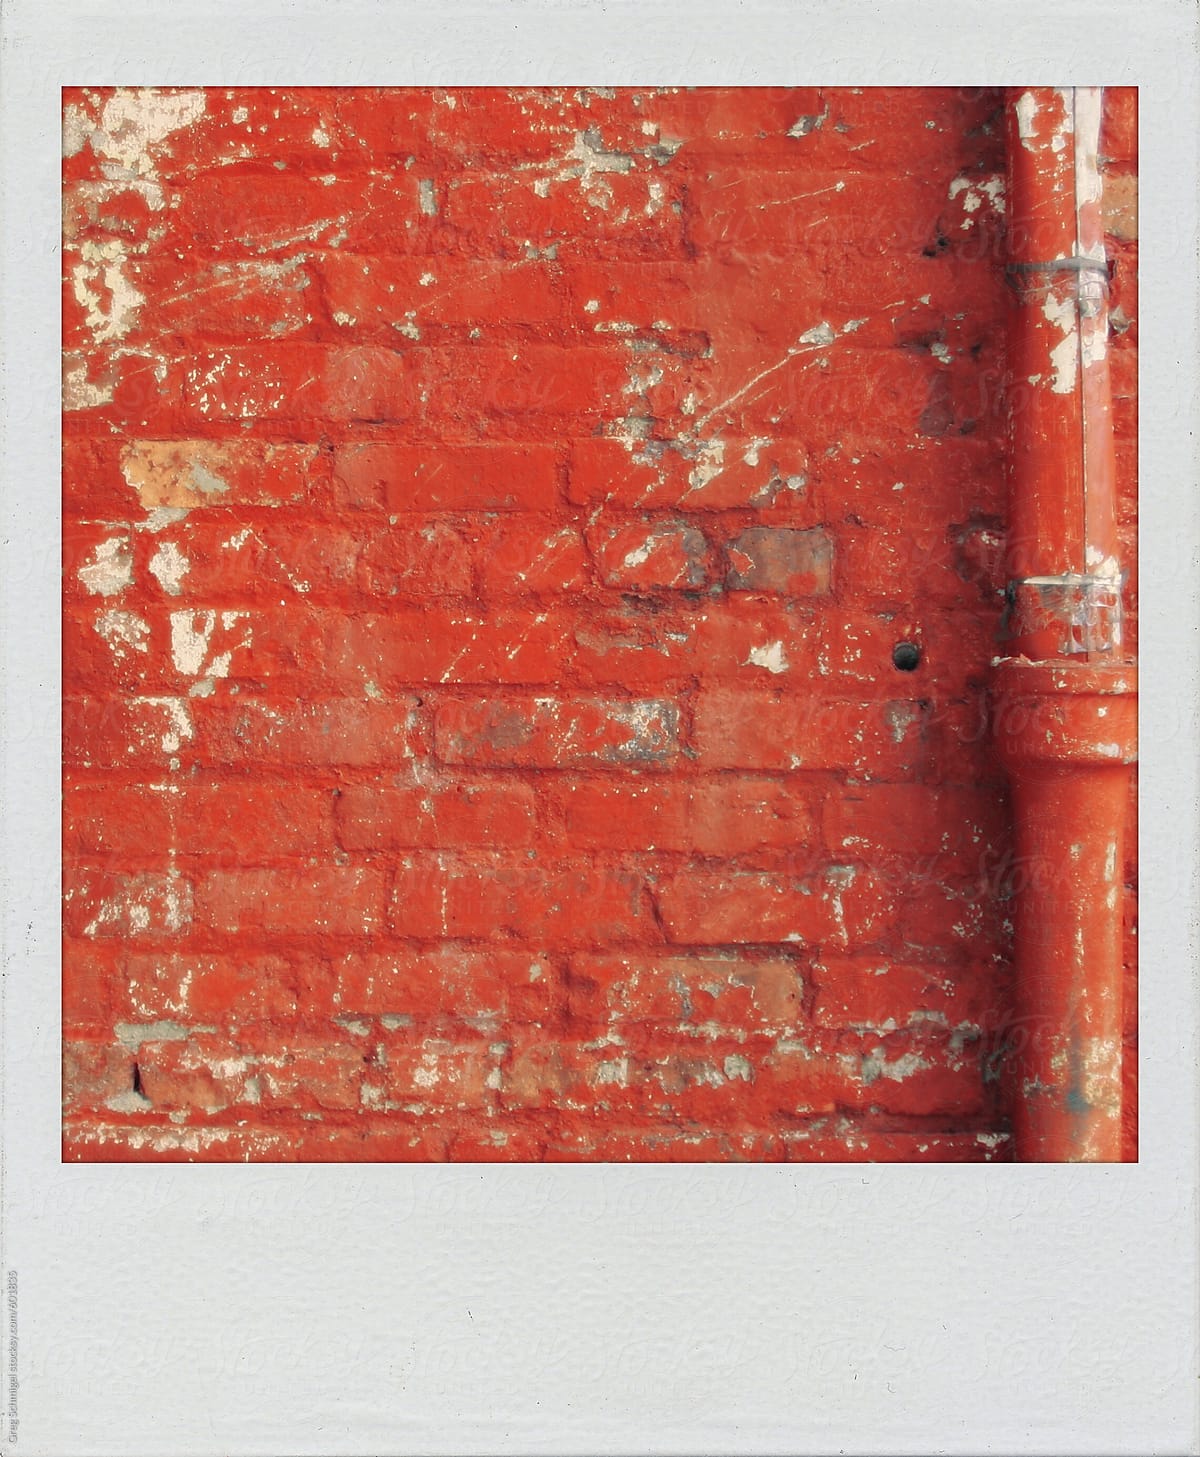 Old polaroid snapshot print of an eroded red brick wall texture